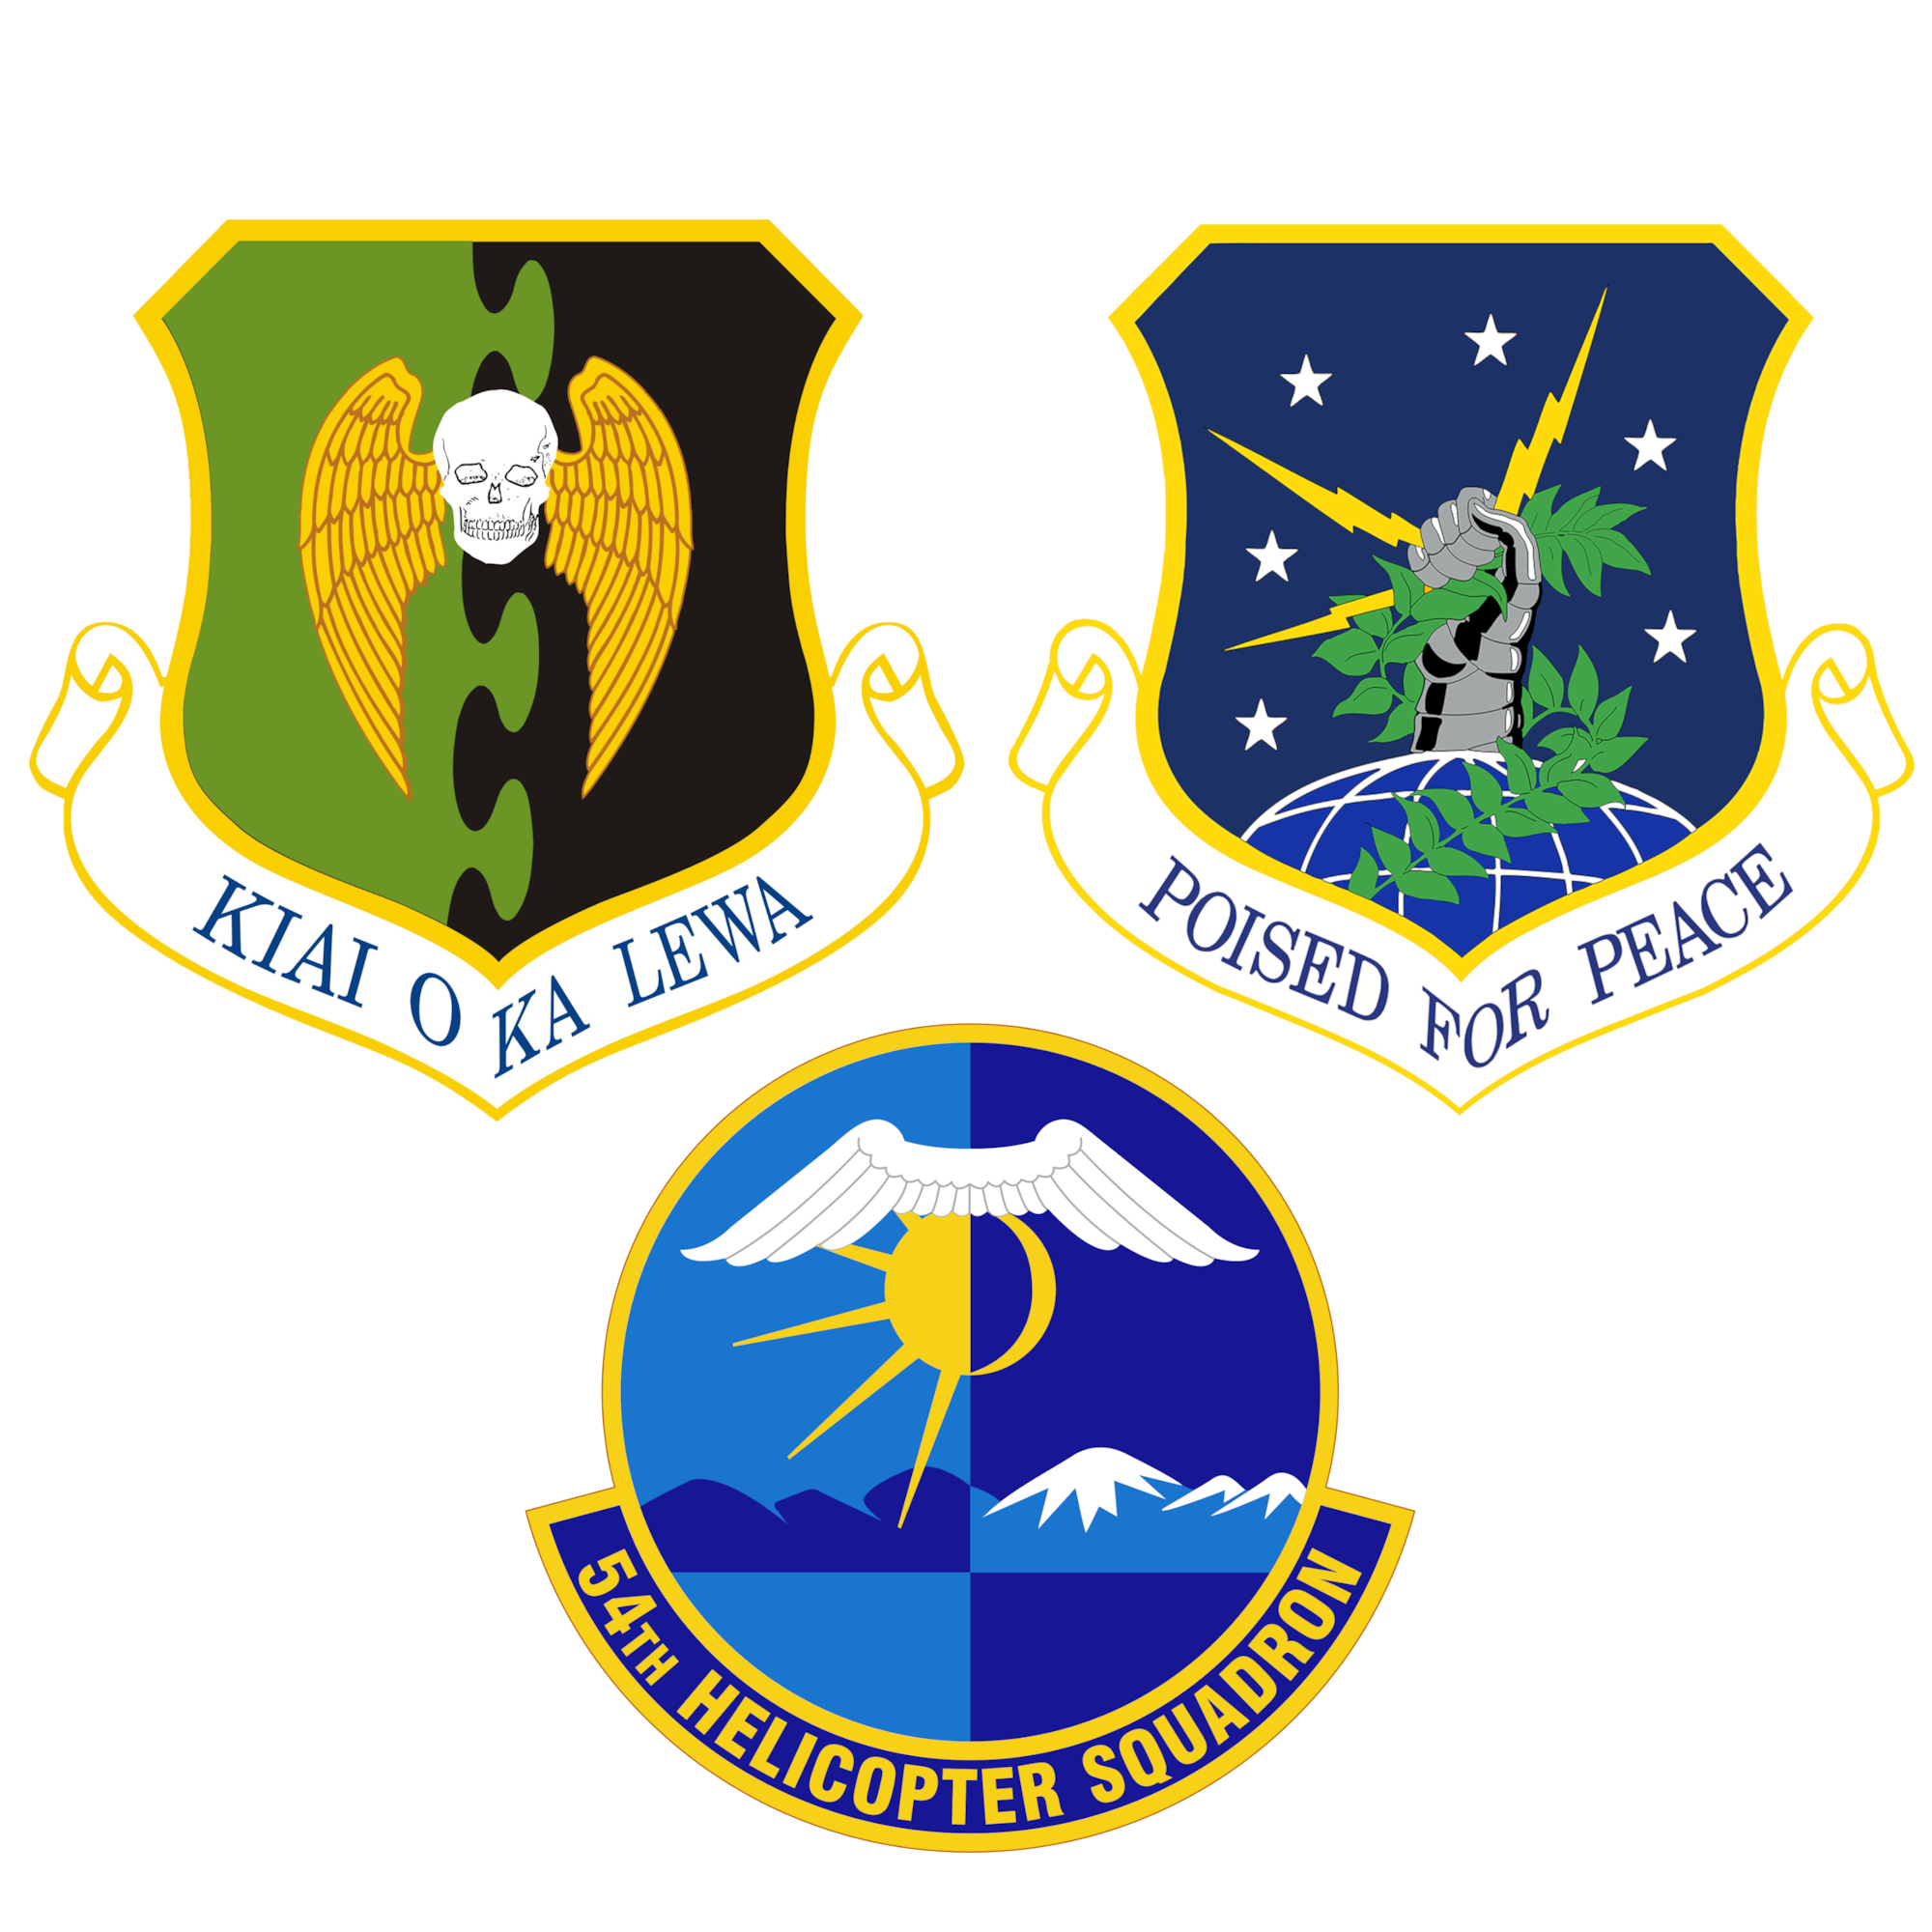 The 5th Bomb Wing, 91st Missile Wing, and 54th Helicopter Squadron logos. The aviation resource management career field includes members from the 91 MW, Airmen in the 5 BW, and 54 HS won Outstanding Large Unit of the Year award. (graphic by Airman 1st Class Luis Gomez)